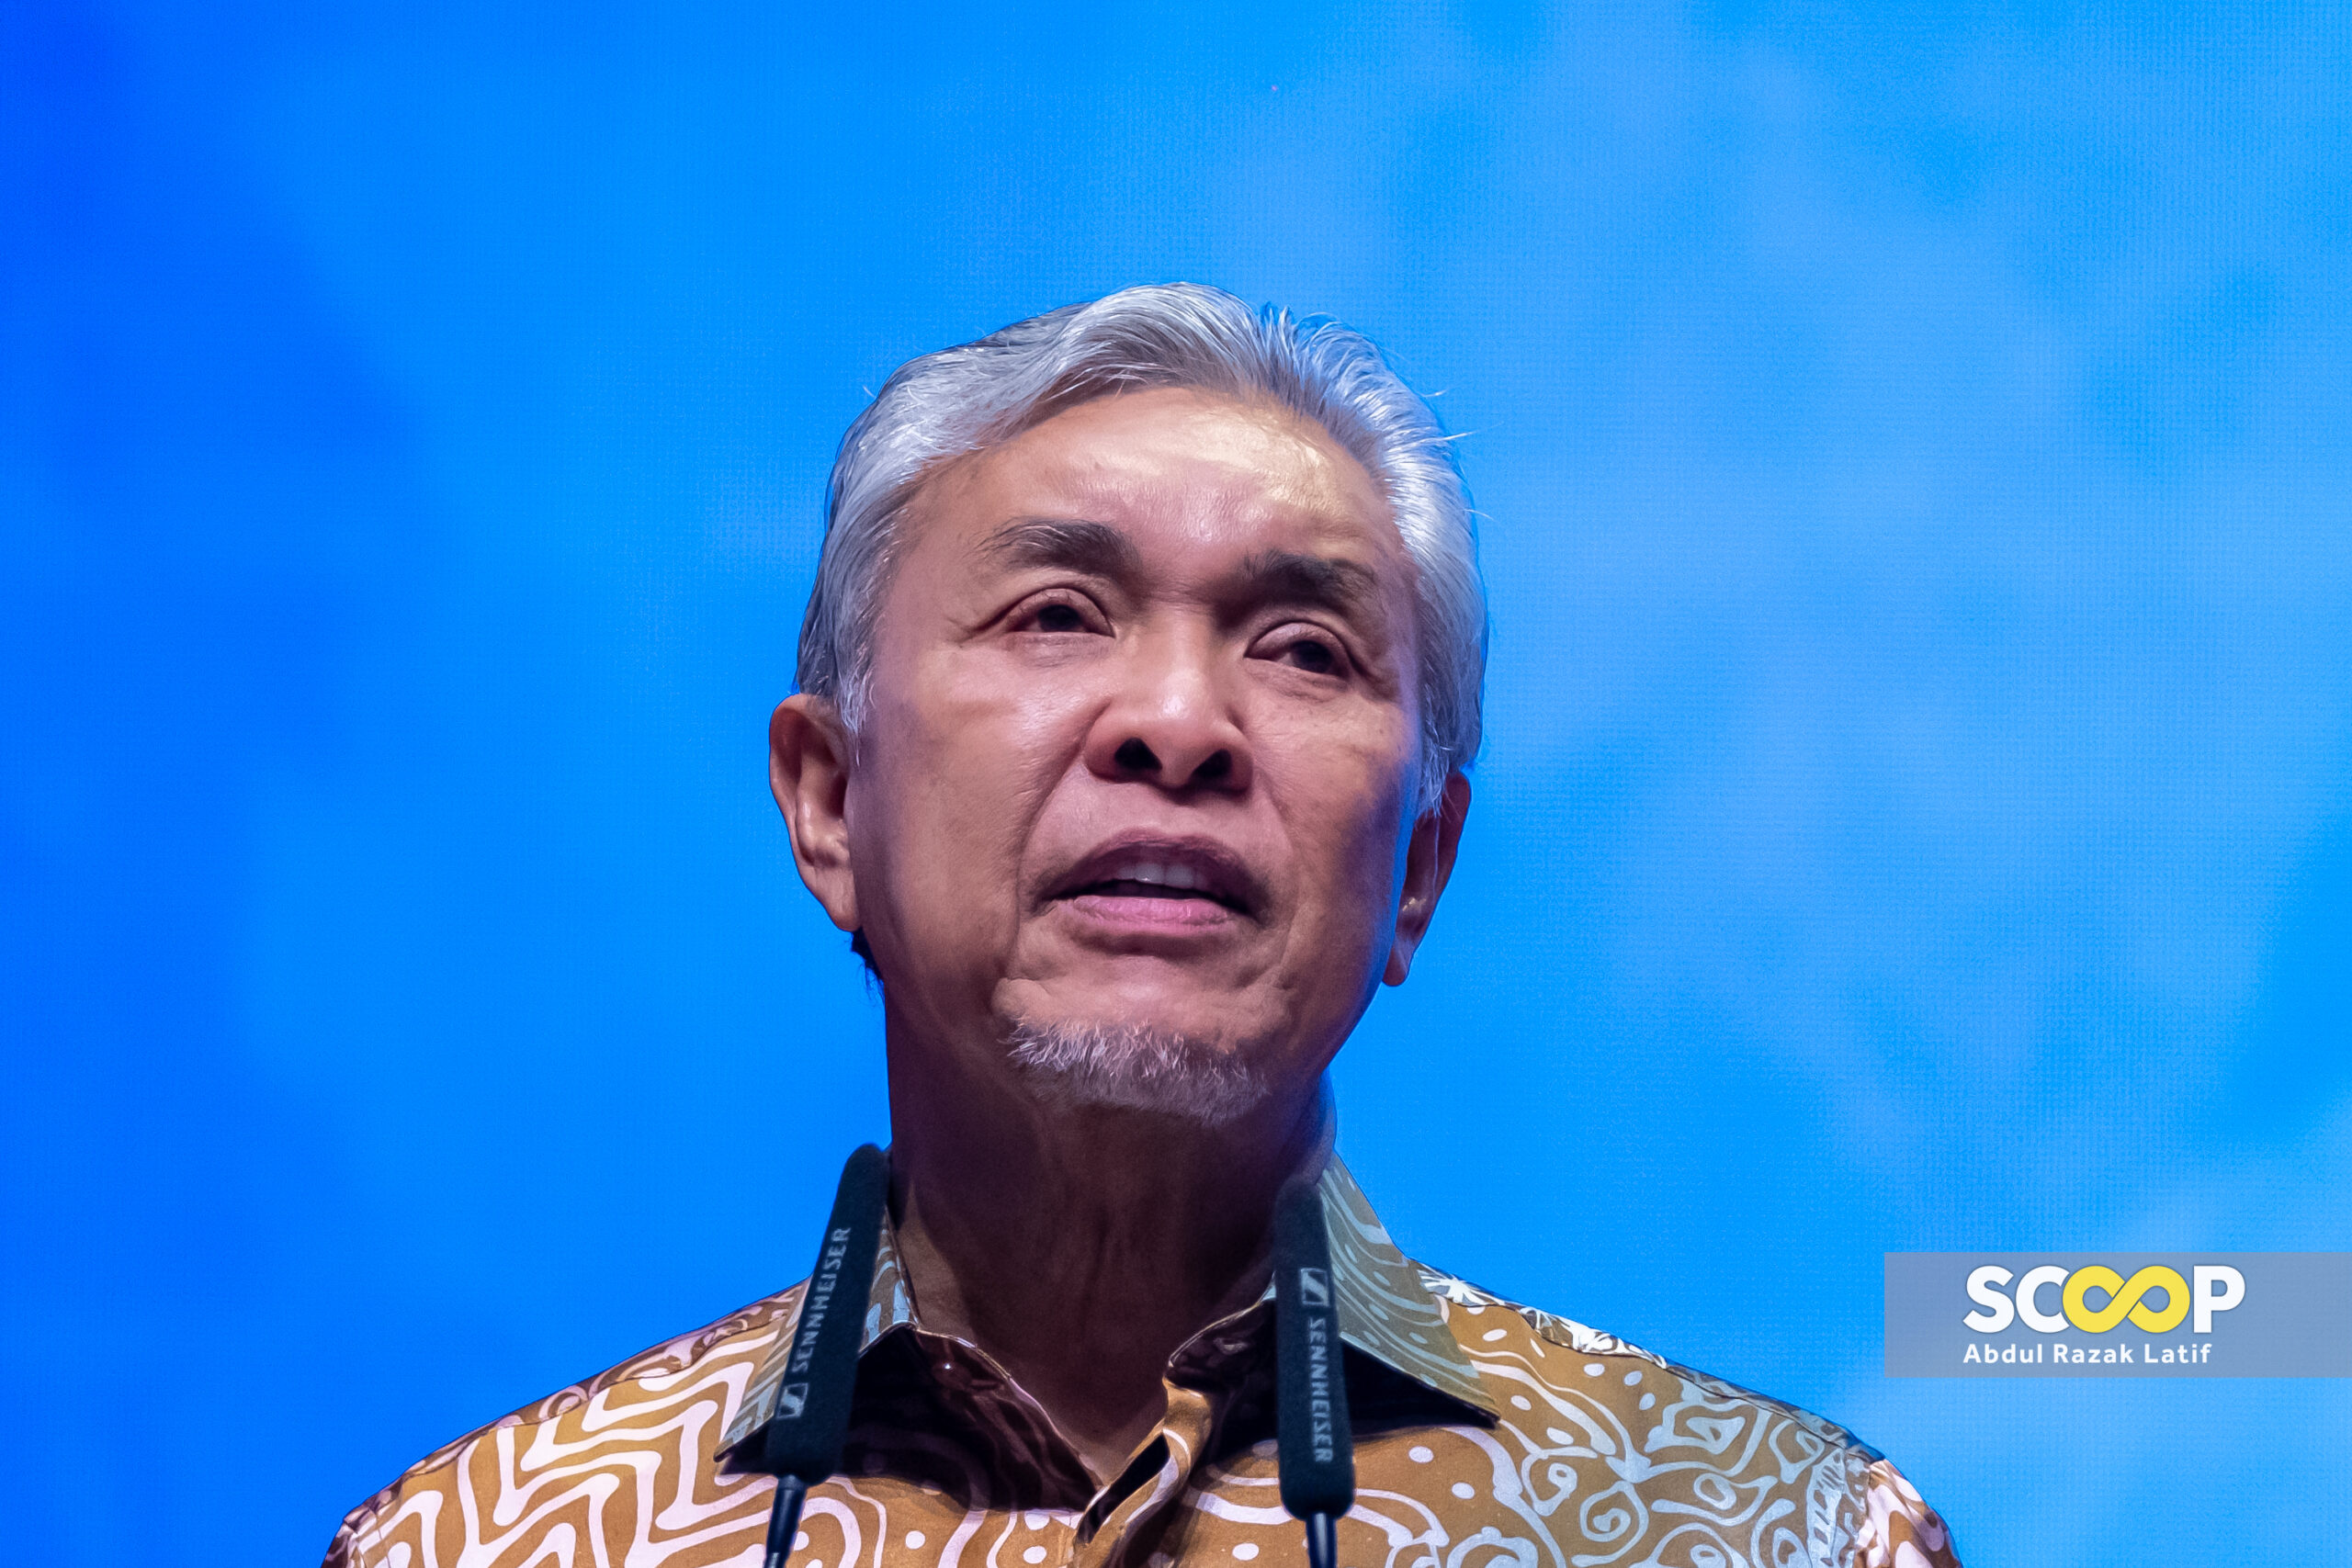 In an affidavit, Zahid voices support for Najib’s request to serve his reduced jail sentence under house arrest